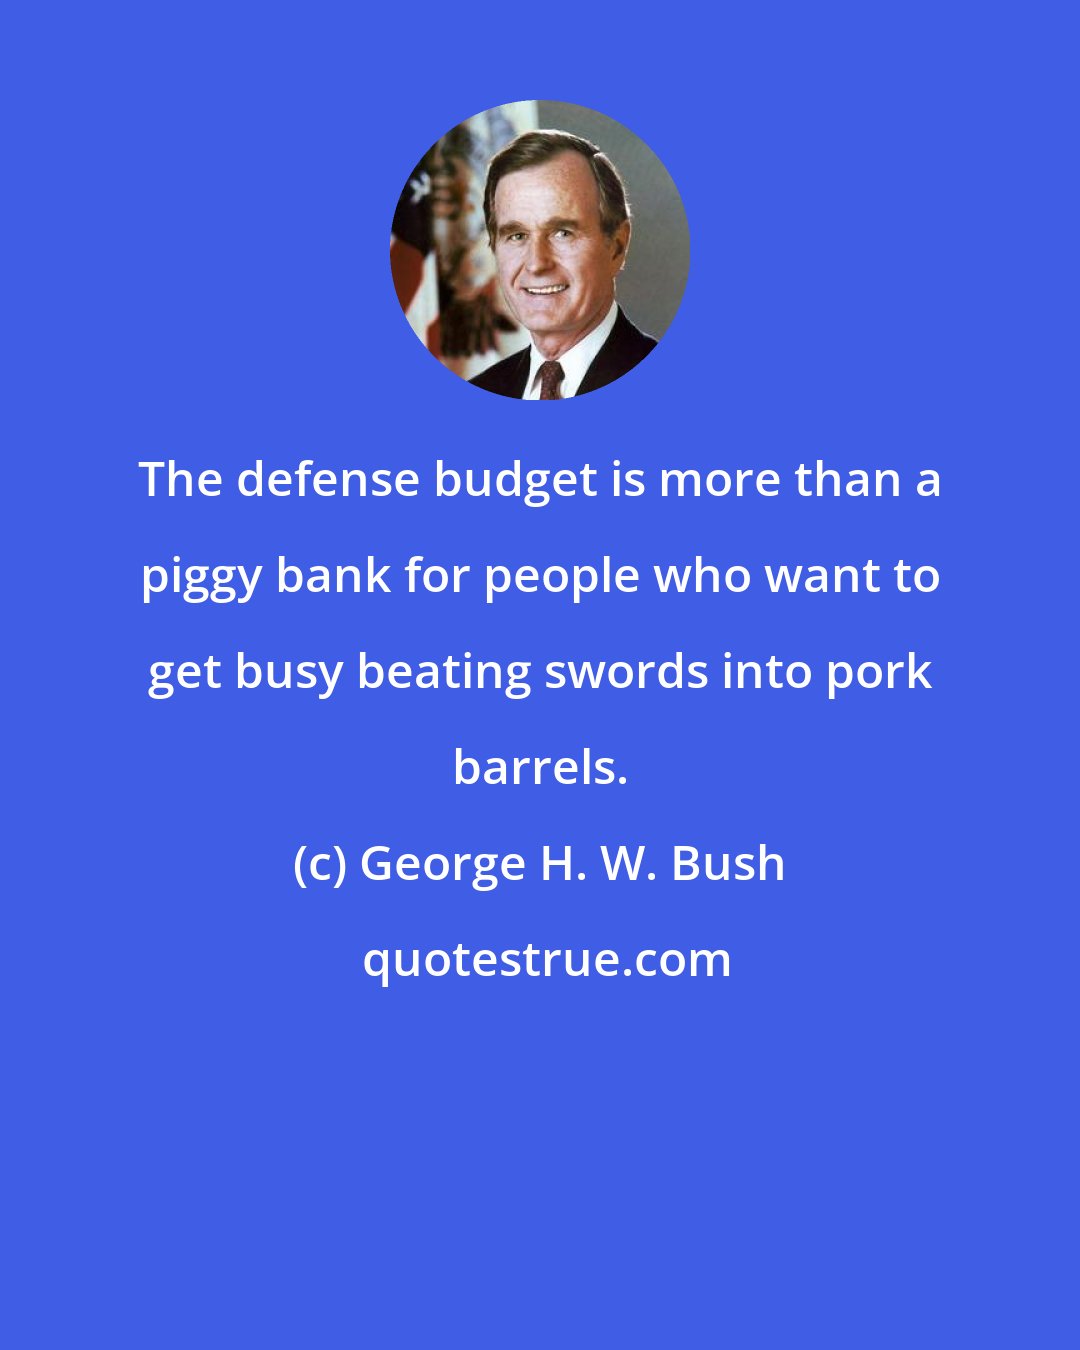 George H. W. Bush: The defense budget is more than a piggy bank for people who want to get busy beating swords into pork barrels.